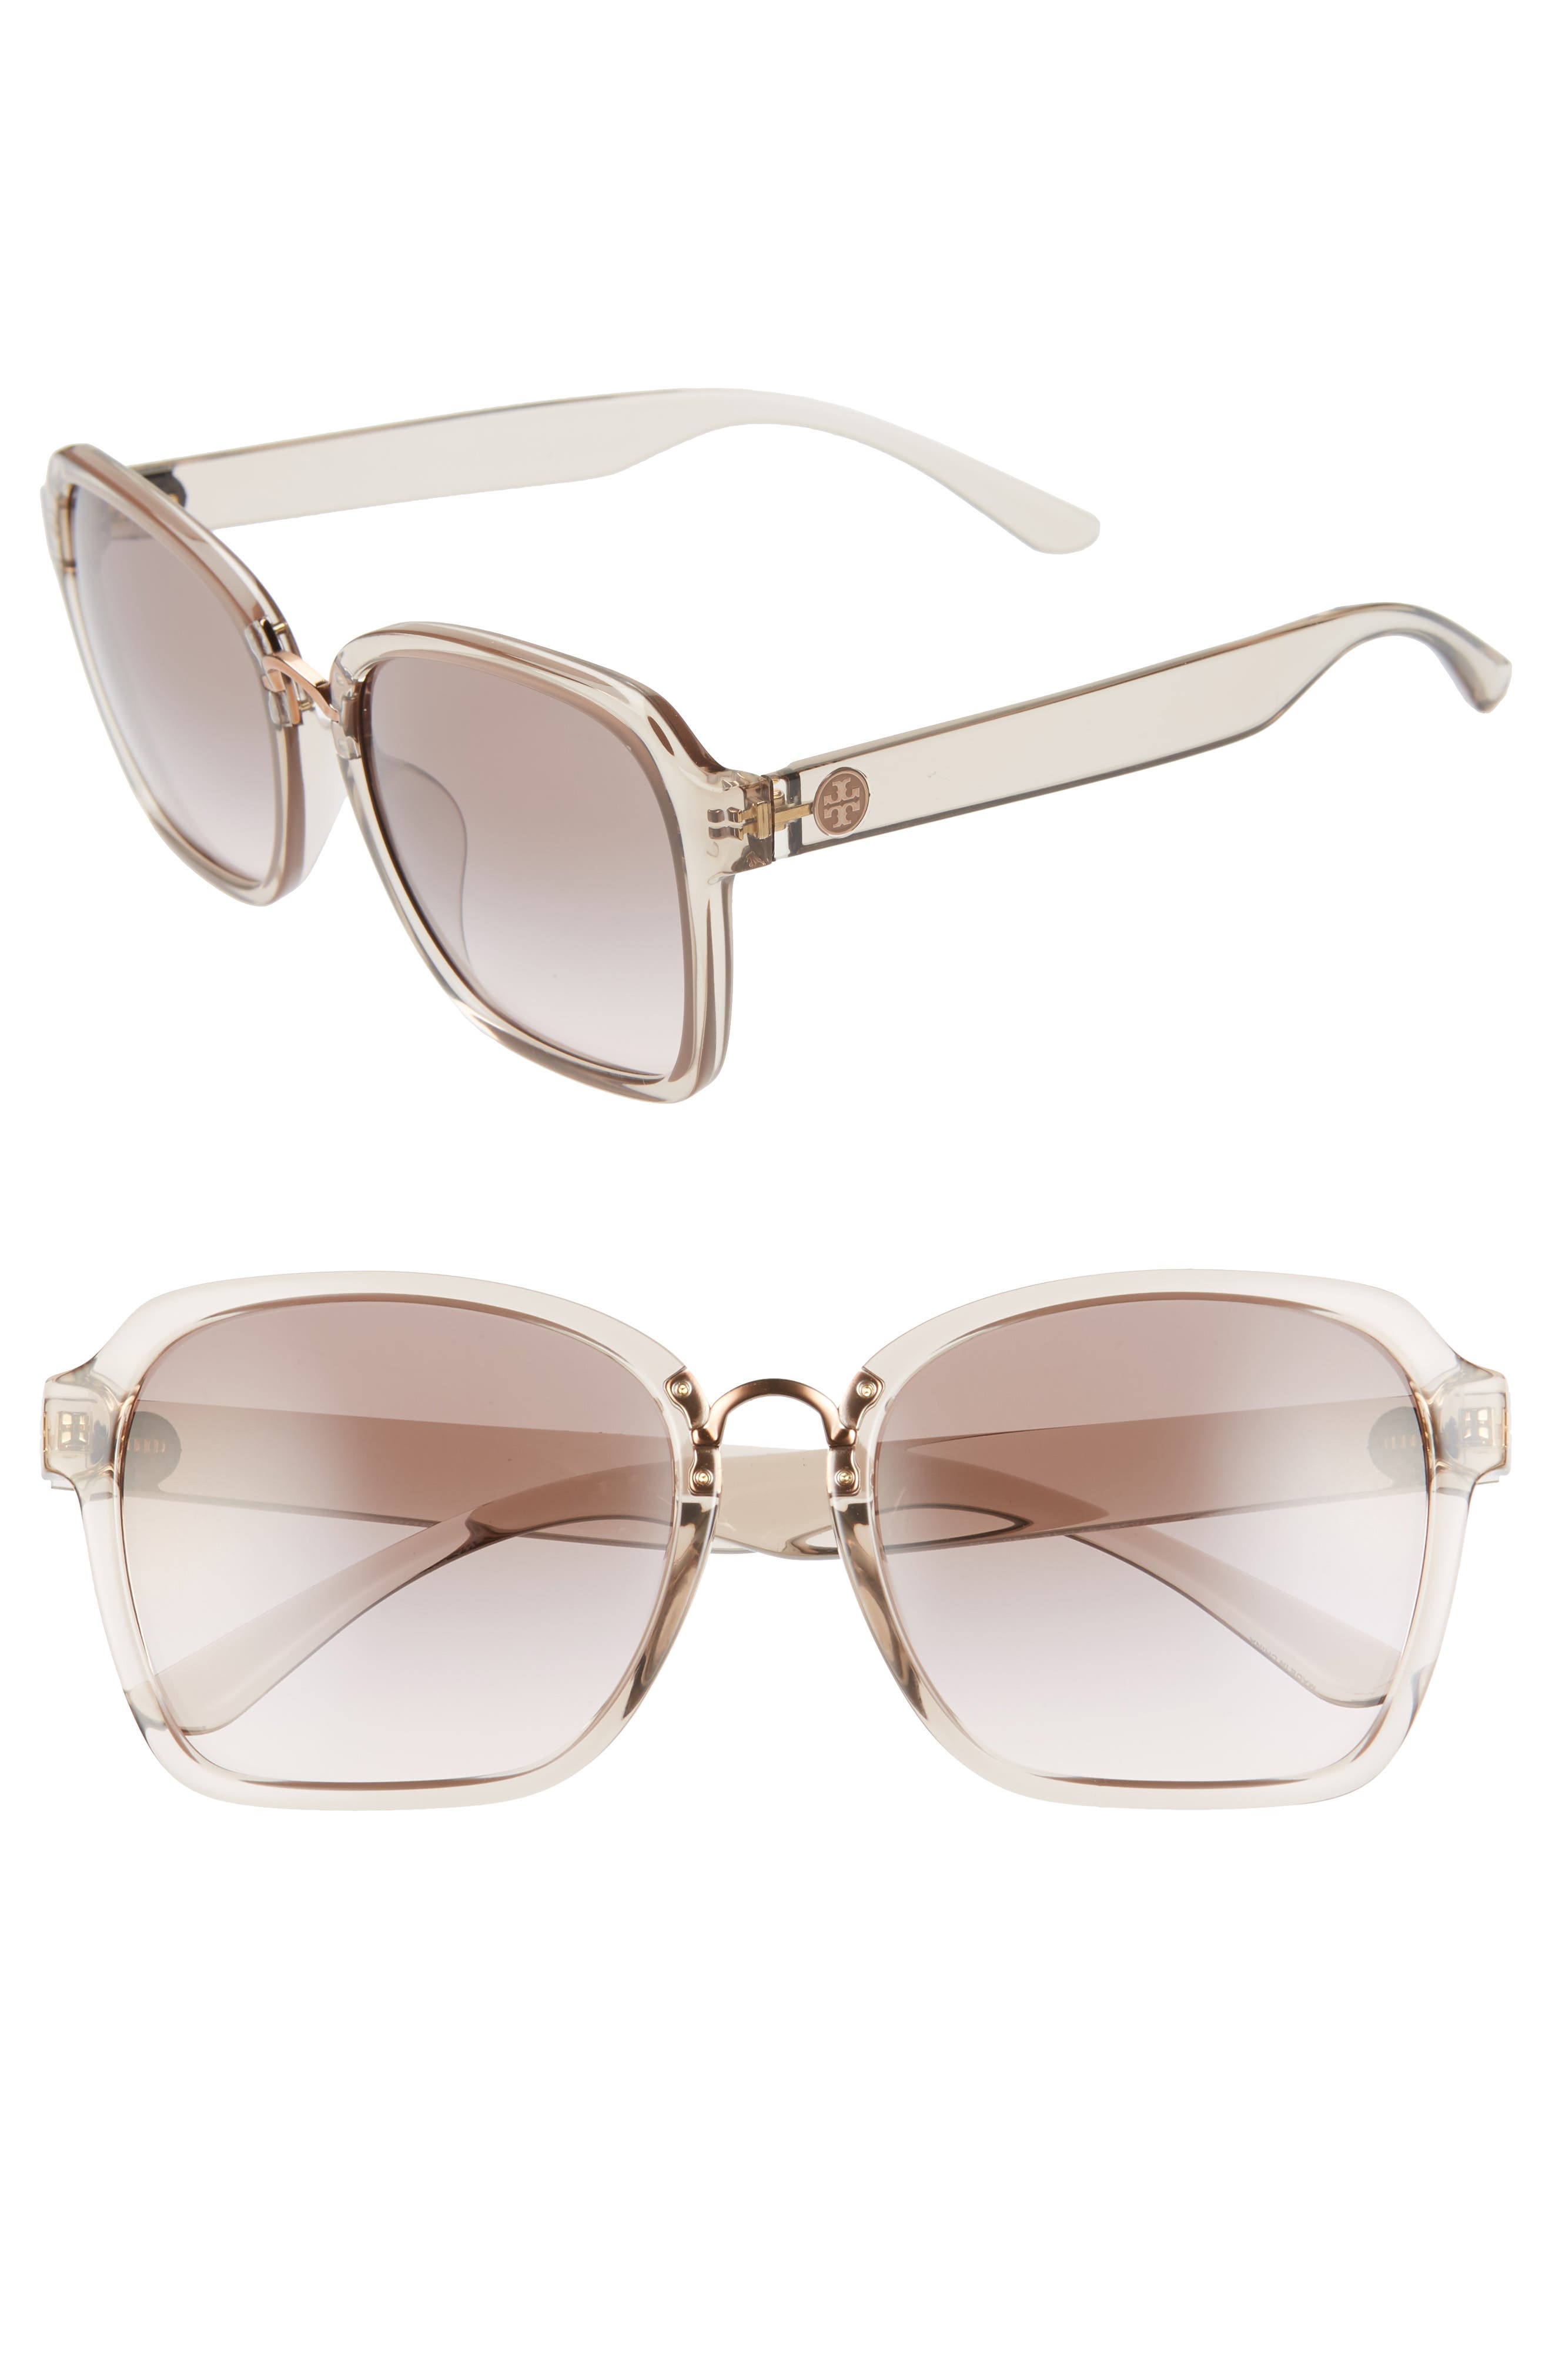 Tory Burch 57mm Gradient Square Sunglasses in Transparent Pink/Grey